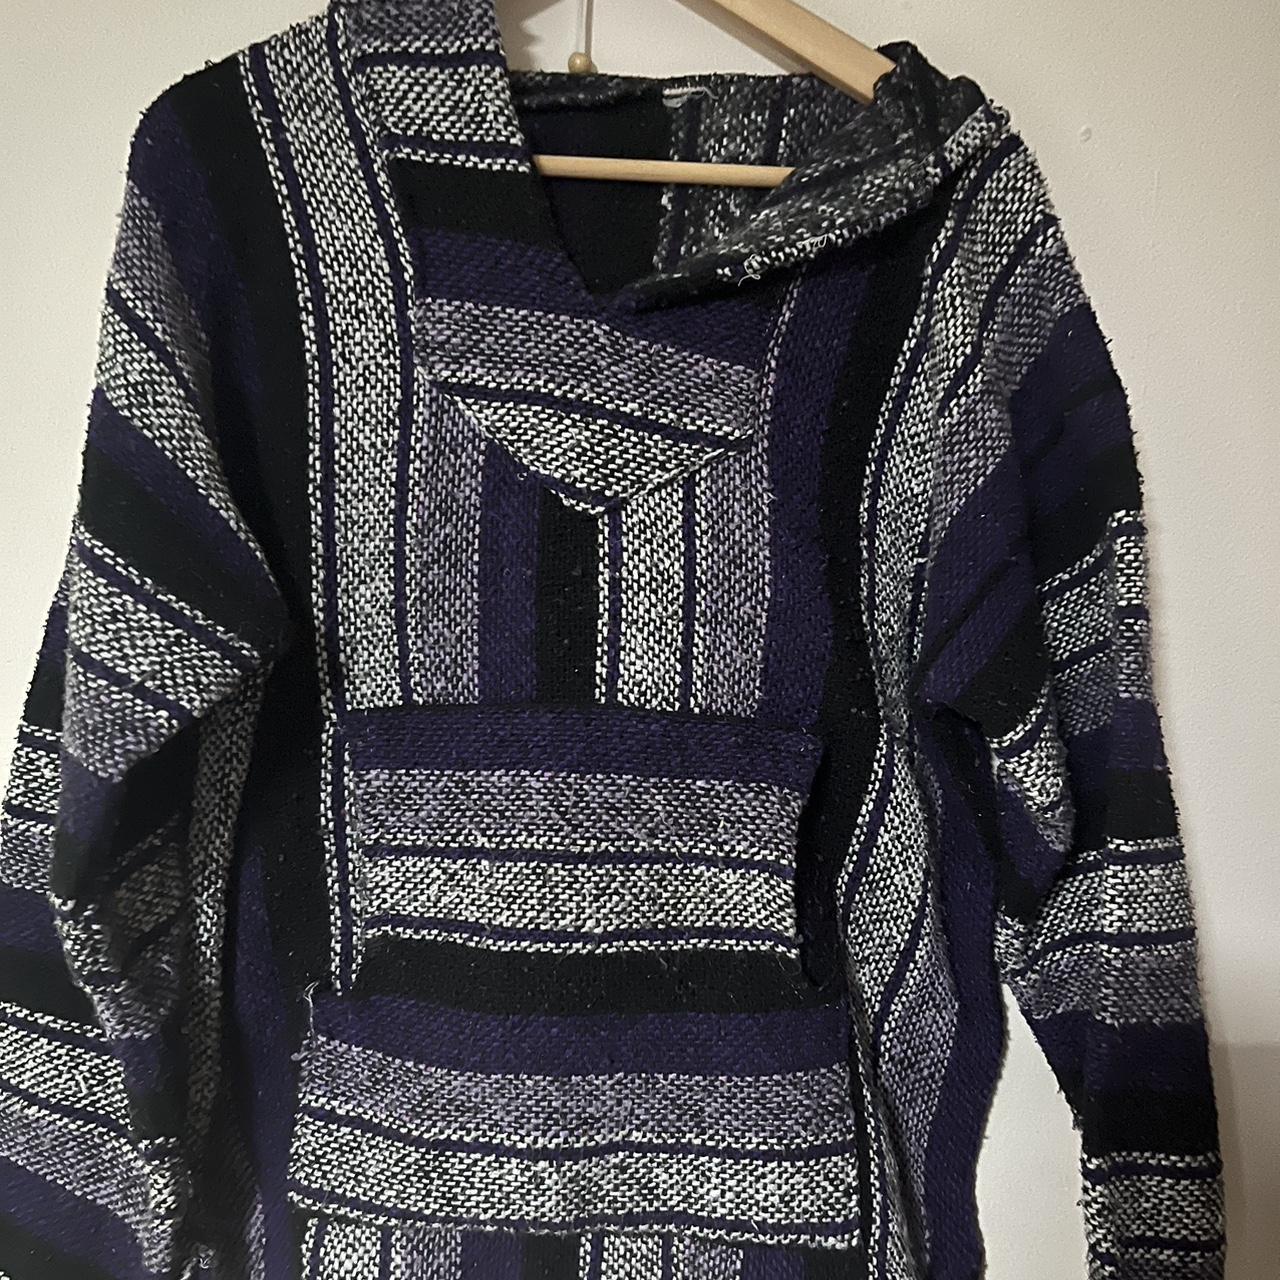 Hippy jumper Worn a few times but great condition... - Depop